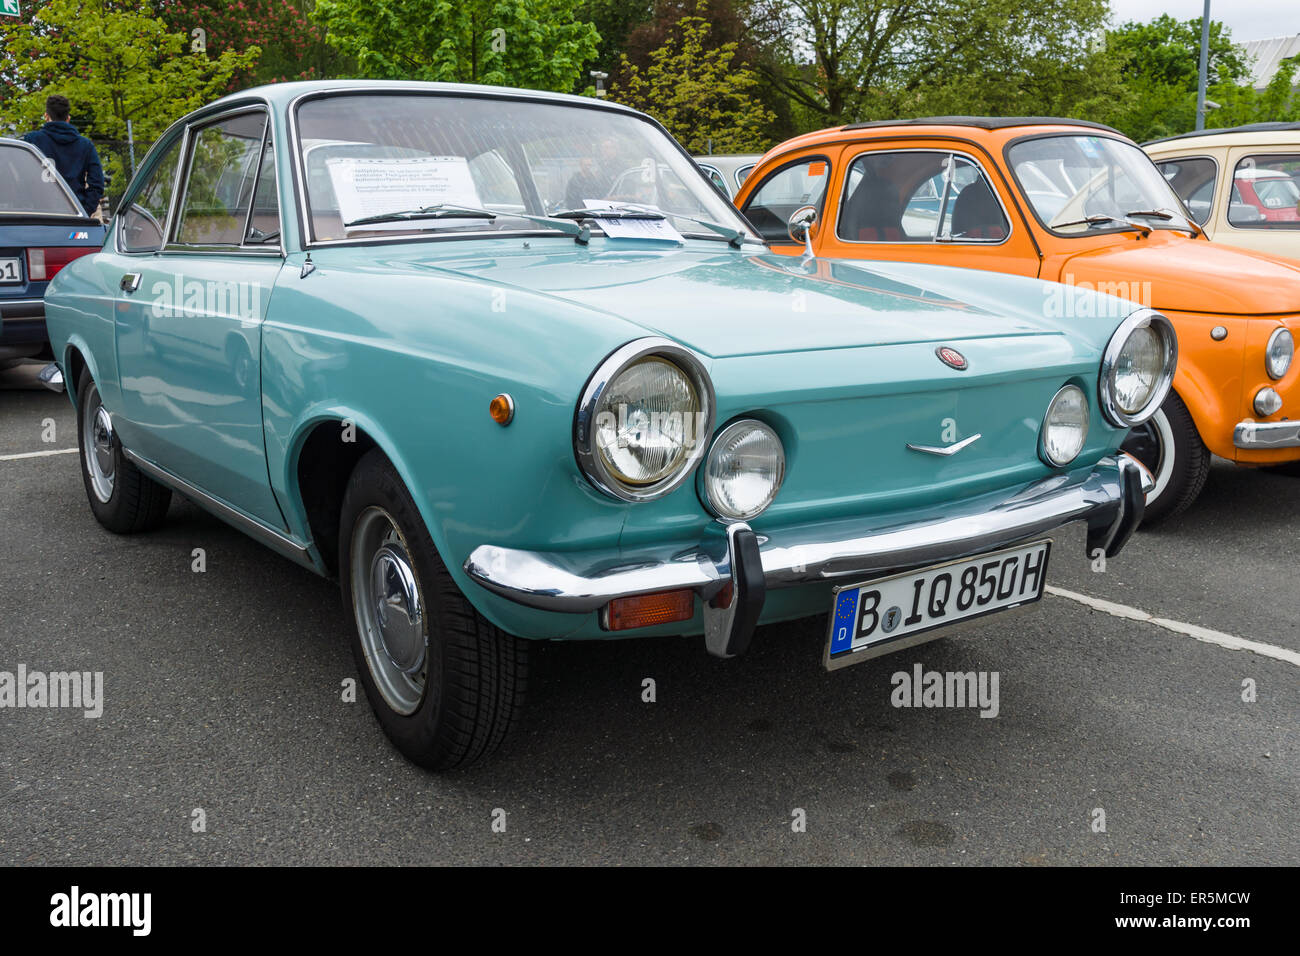 BERLIN - MAY 10, 2015: Vintage car Fiat 850 coupe, 1970. The 28th Berlin-Brandenburg Oldtimer Day Stock Photo